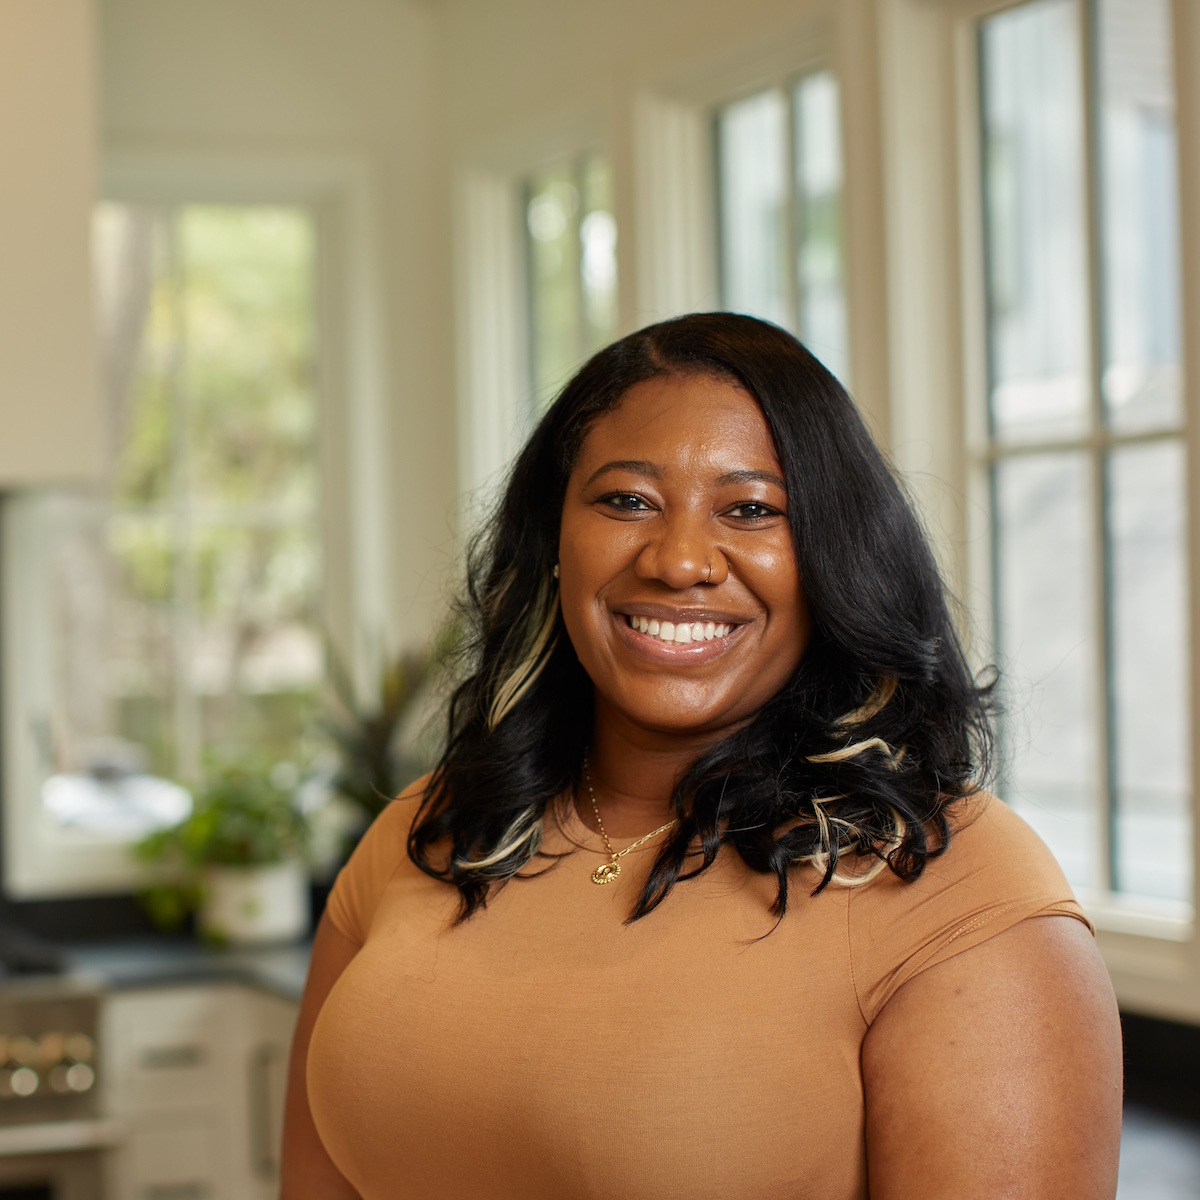 Meet Danielle Walters, a Project Manager at @Cisco. Through Cisco’s commitment to #SkillsFirstHiring, Danielle’s in a role where she makes a huge impact. This Black History Month, we’re celebrating Danielle & the impact of our coalition. Learn more ➡️ oneten.org